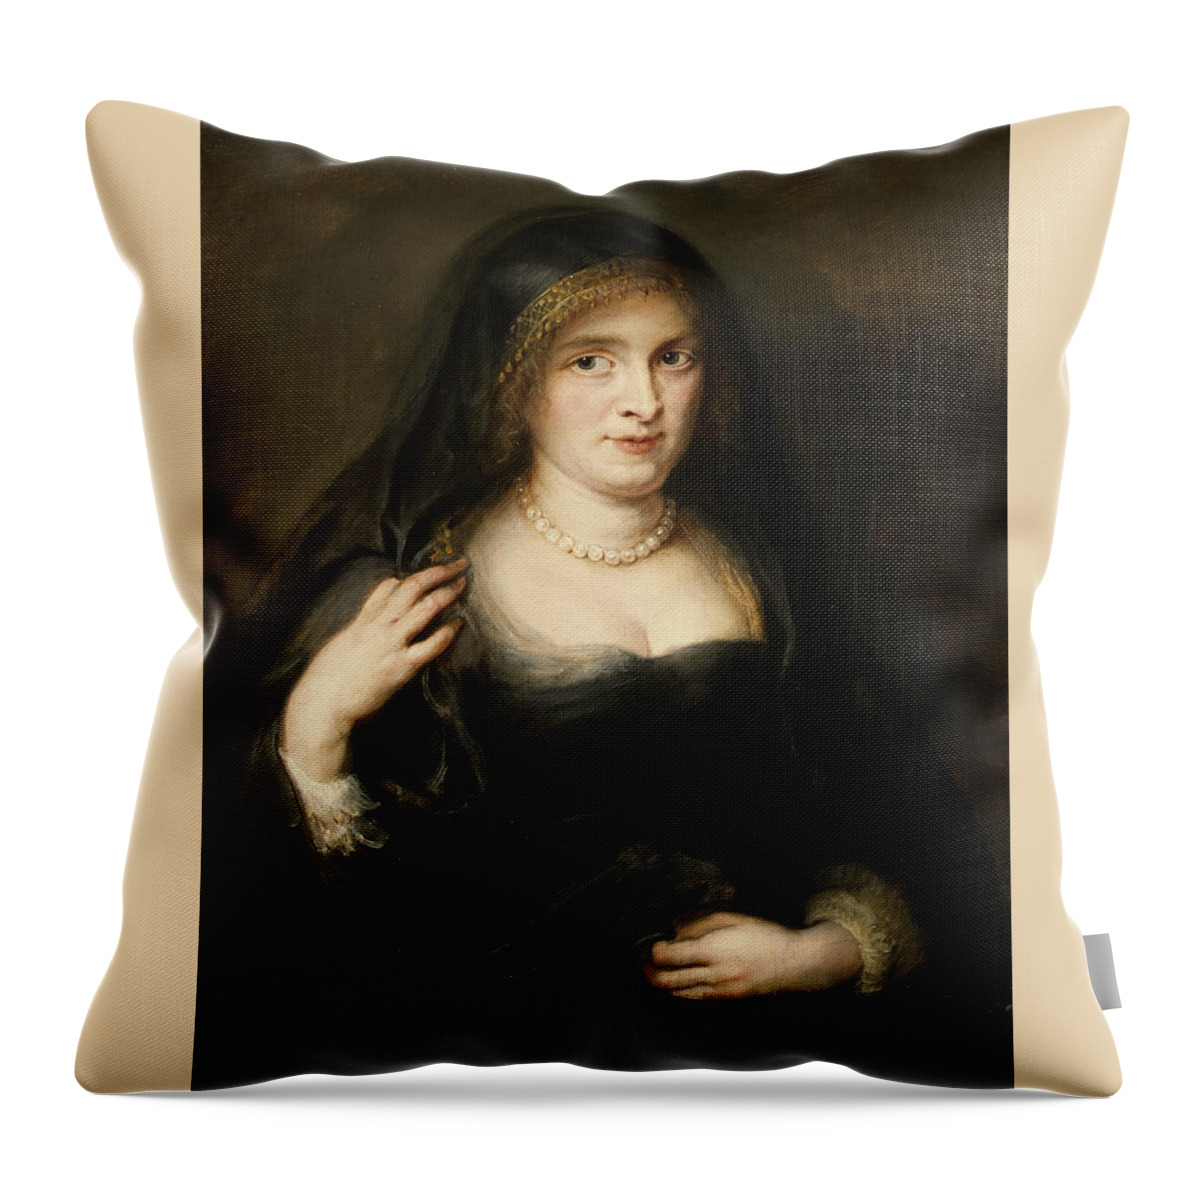 17th Century Art Throw Pillow featuring the painting Portrait of a Woman, Probably Susanna Lunden by Peter Paul Rubens